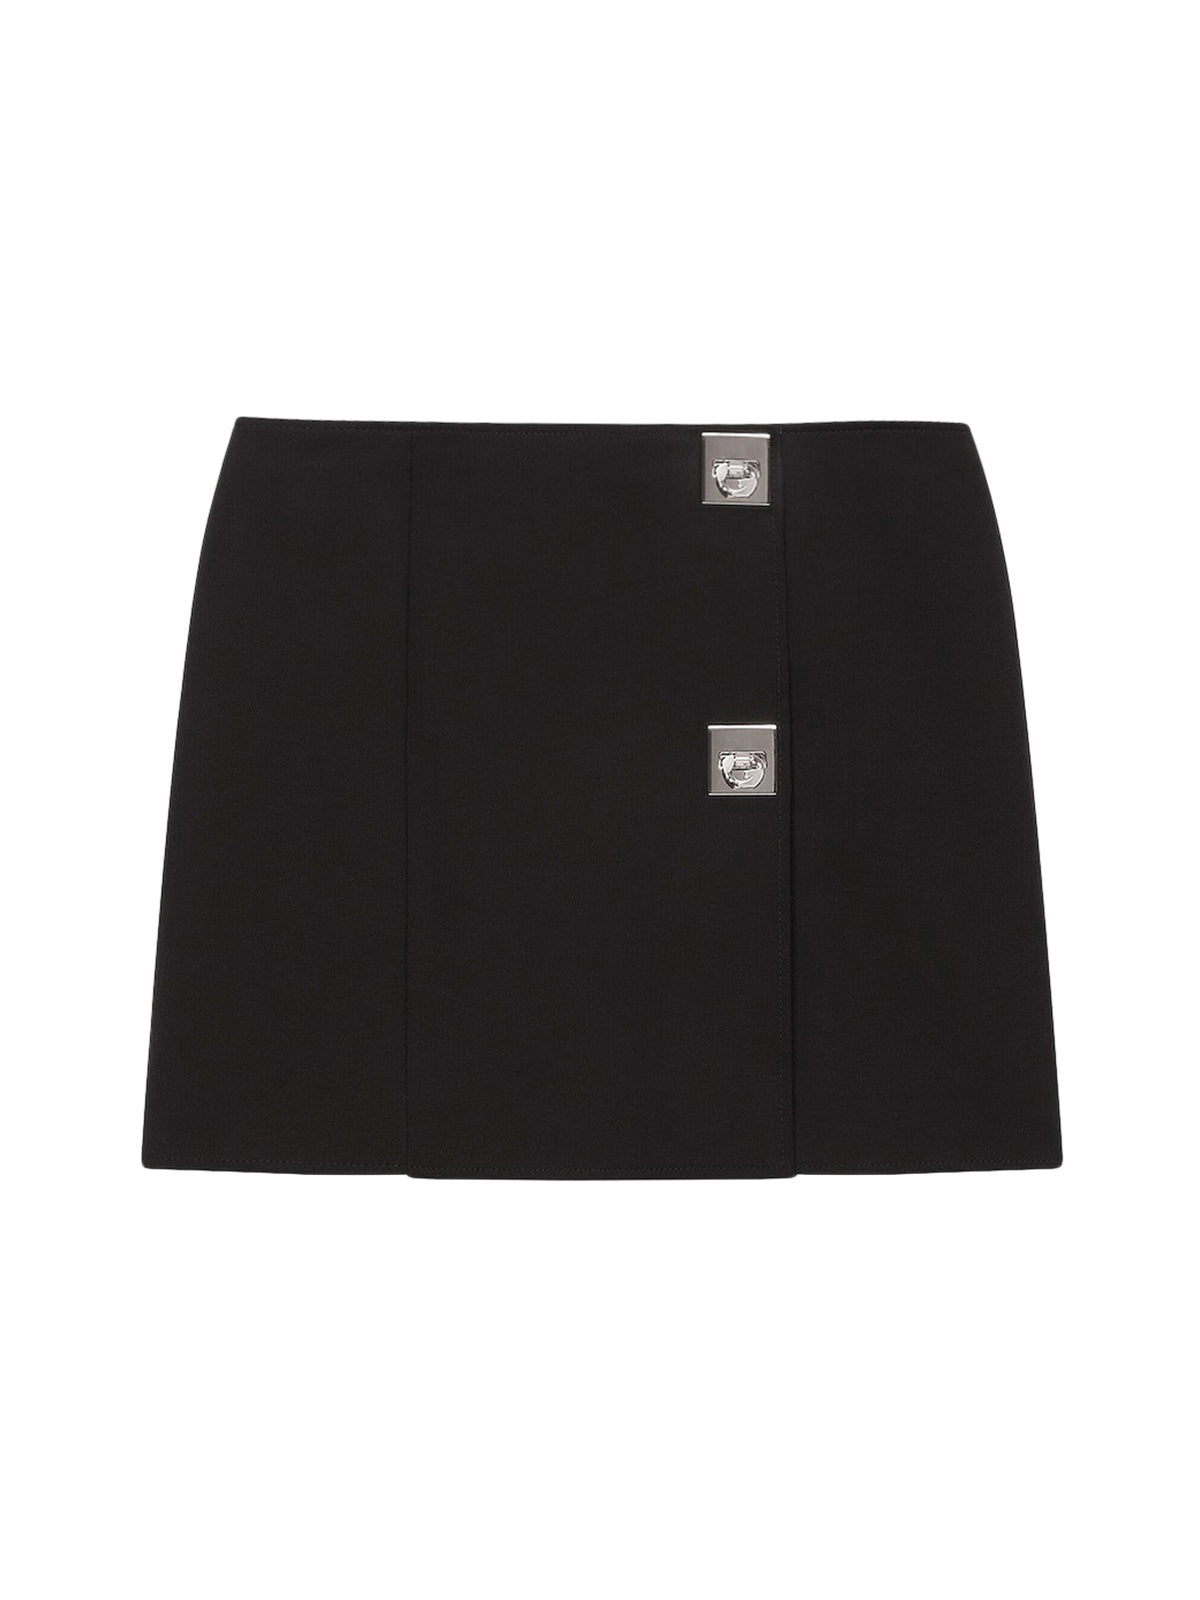 Skirt in technical fibre with G Lock buckles